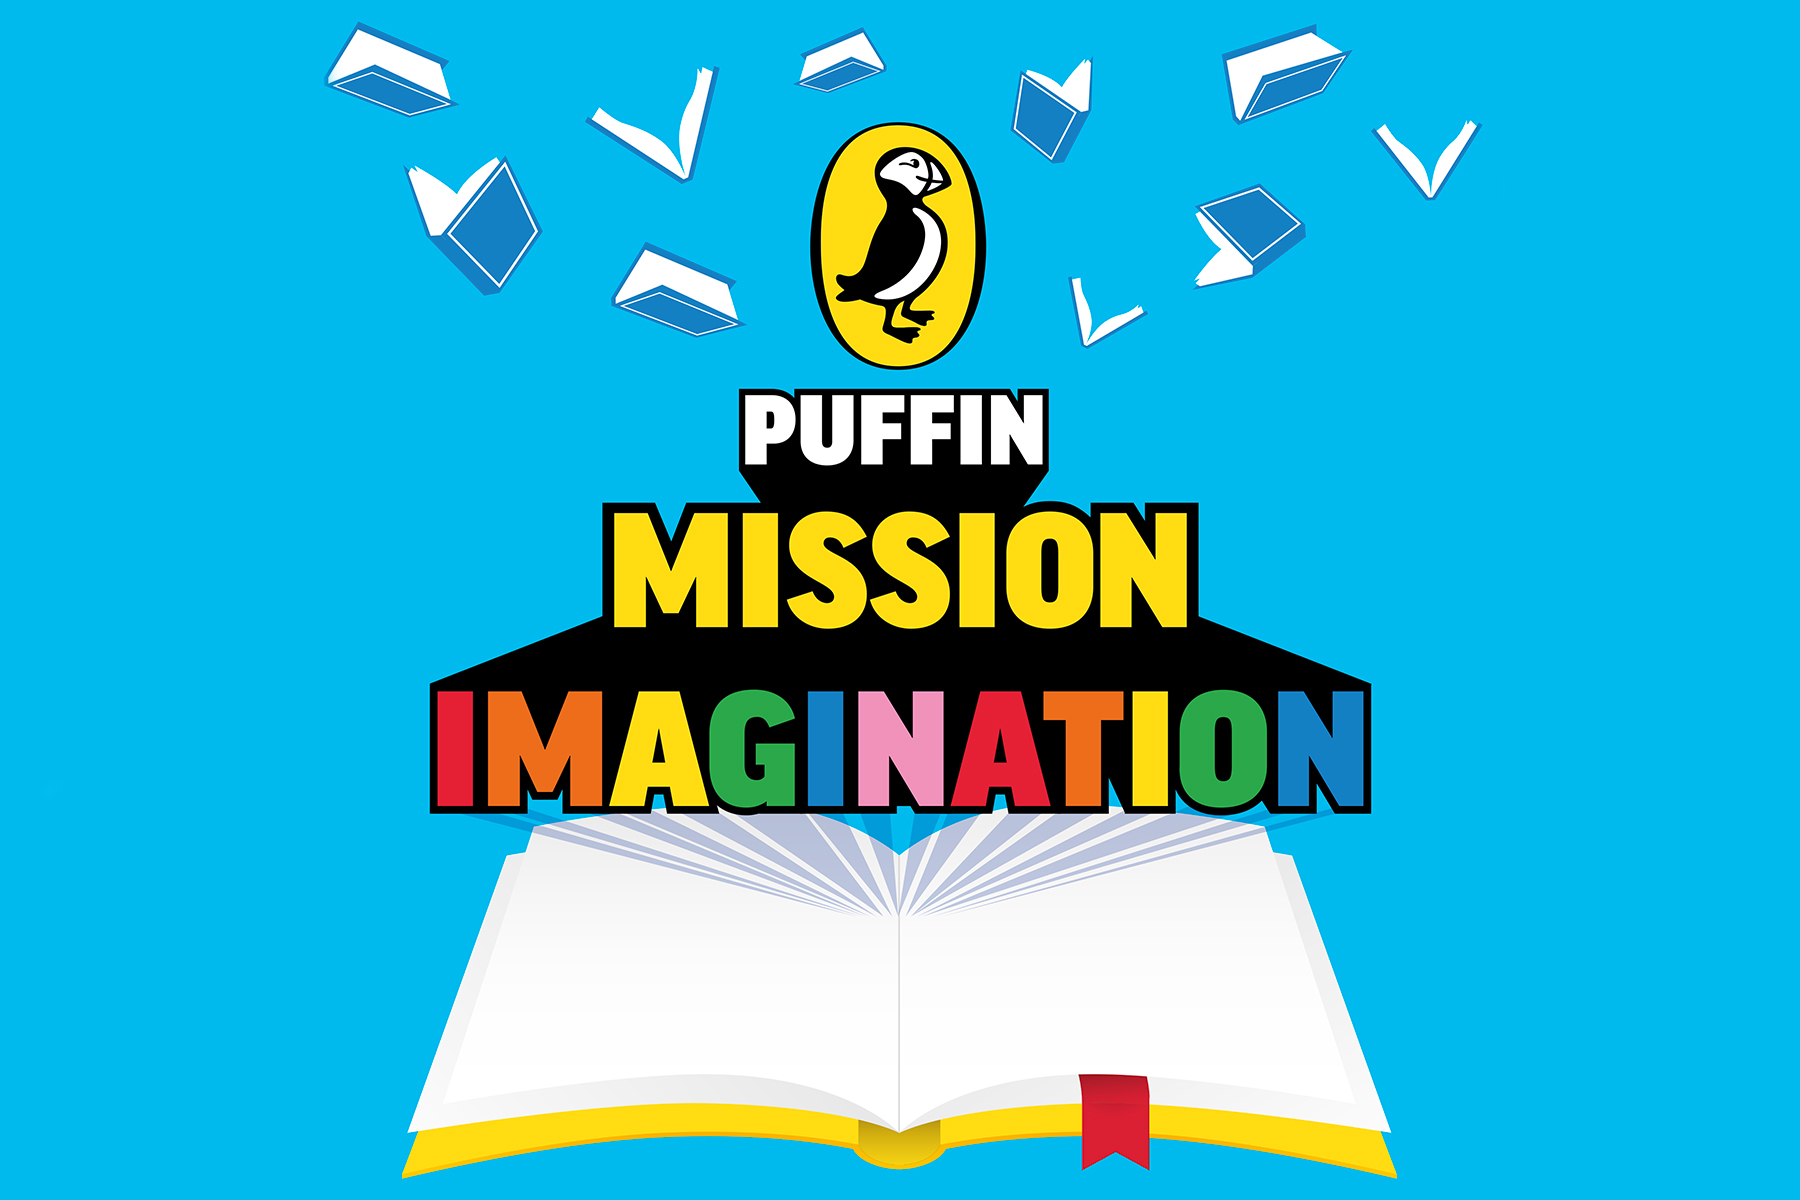 A blue image with the words 'Puffin Mission Imagination' in the centre in a bold multicoloured graphic text above an illustration of an open book